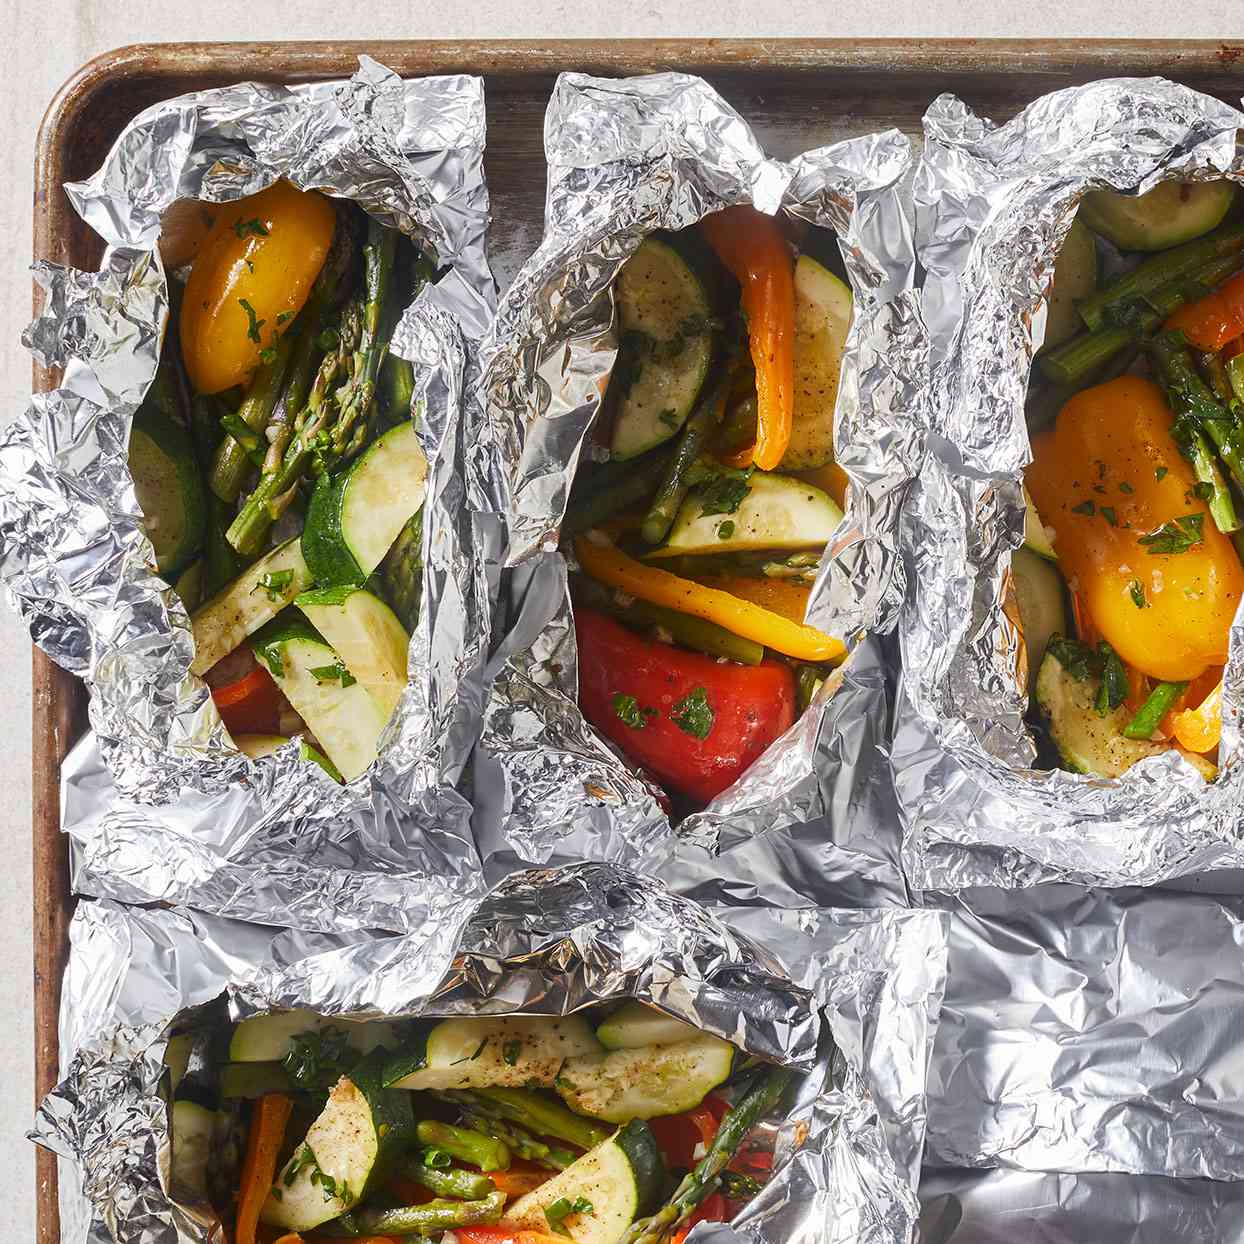 How To Grill Vegetables In Foil